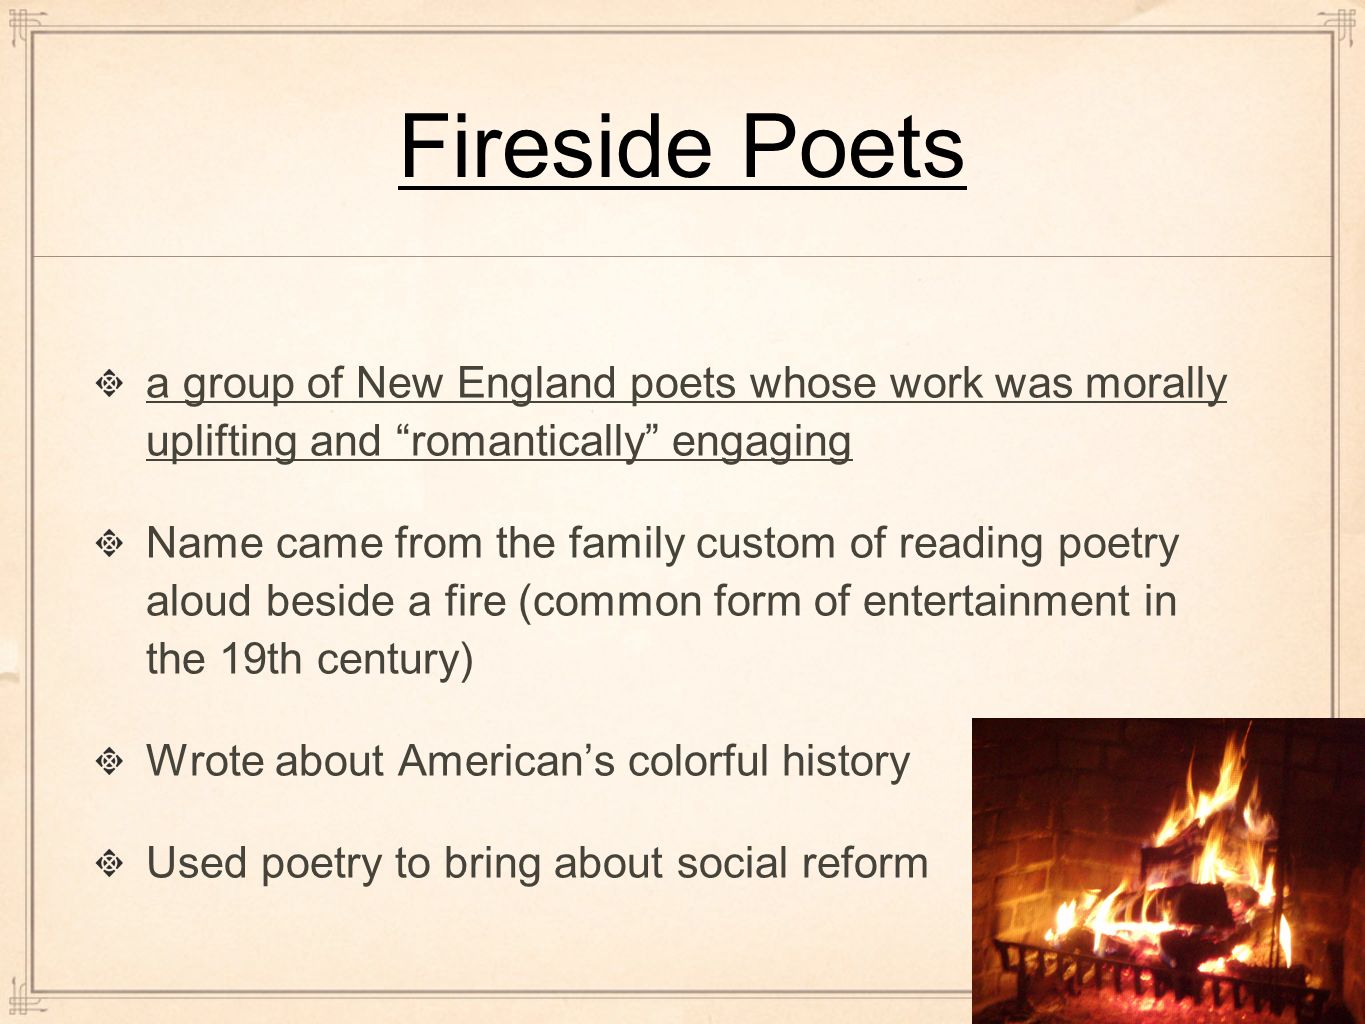 what did the fireside poets write about